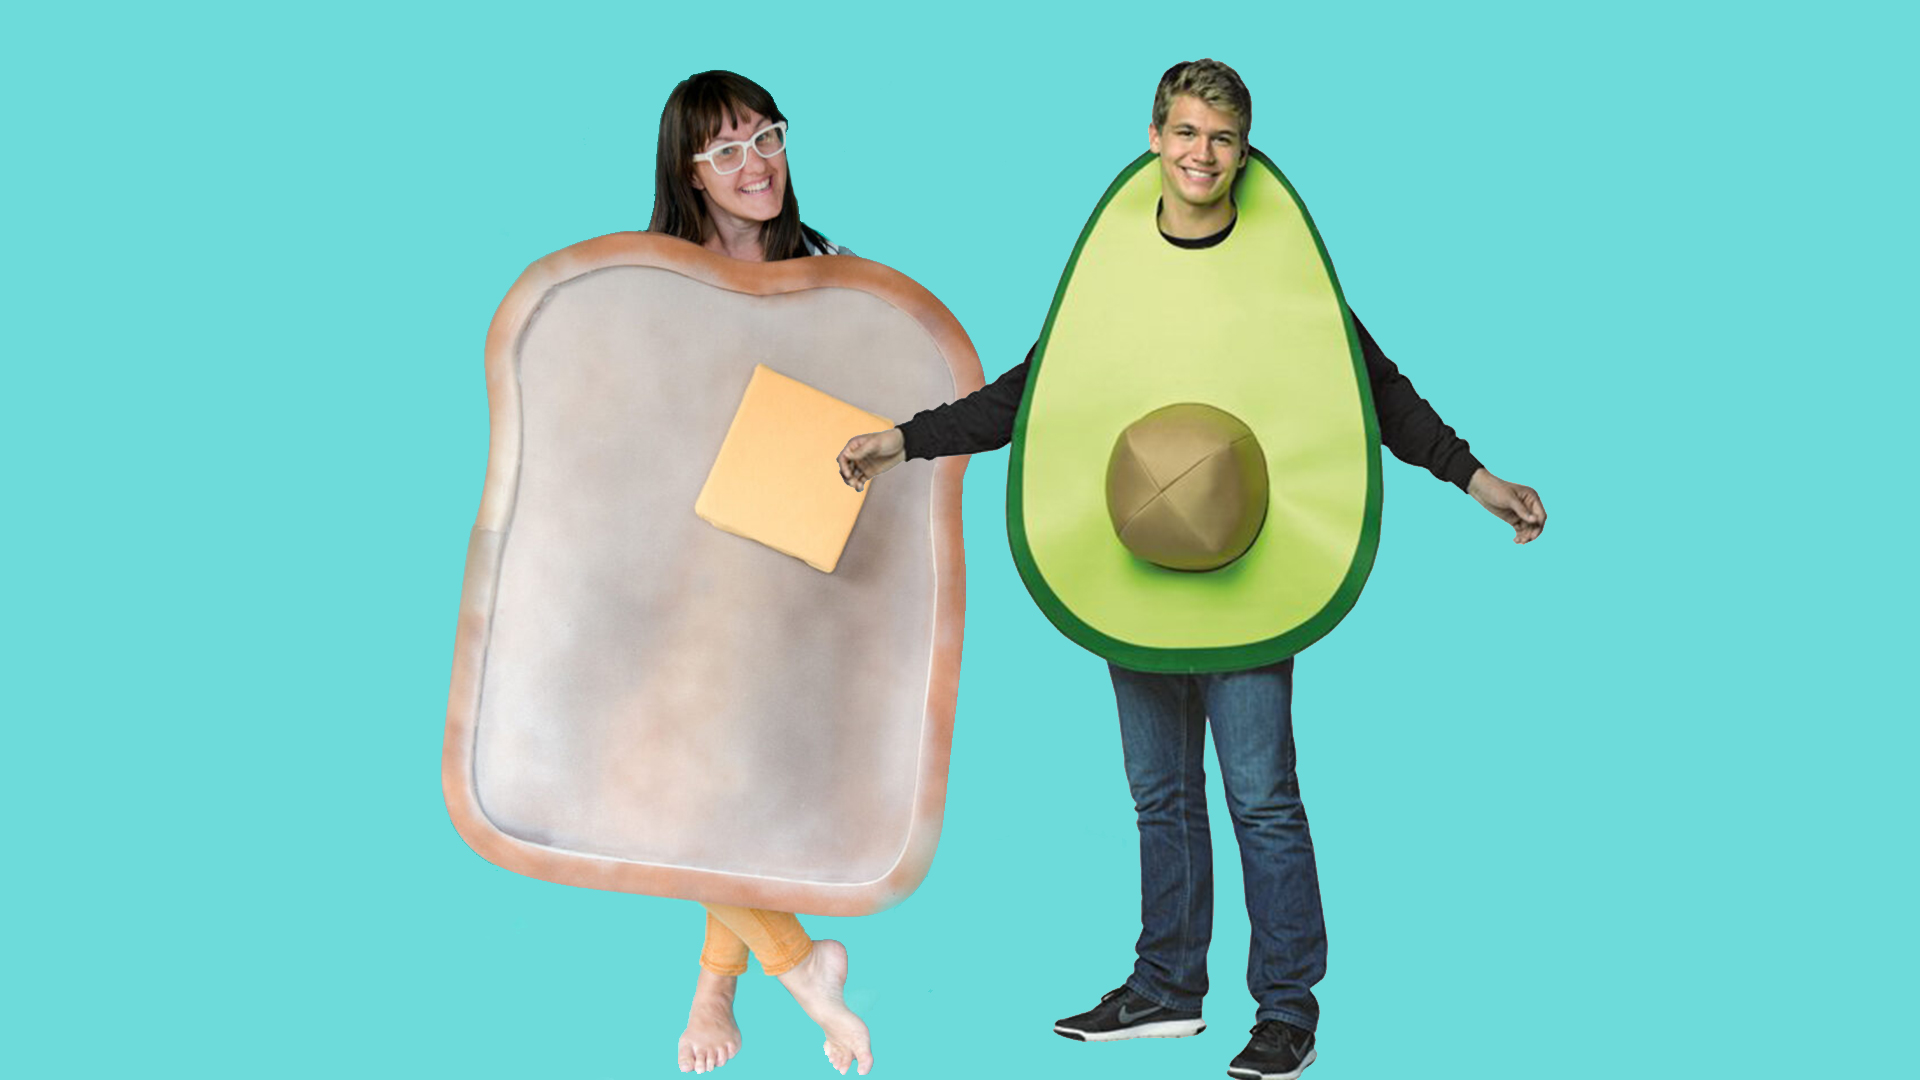 Woman dressed as toast and man dressed as avocado posing for a picture.